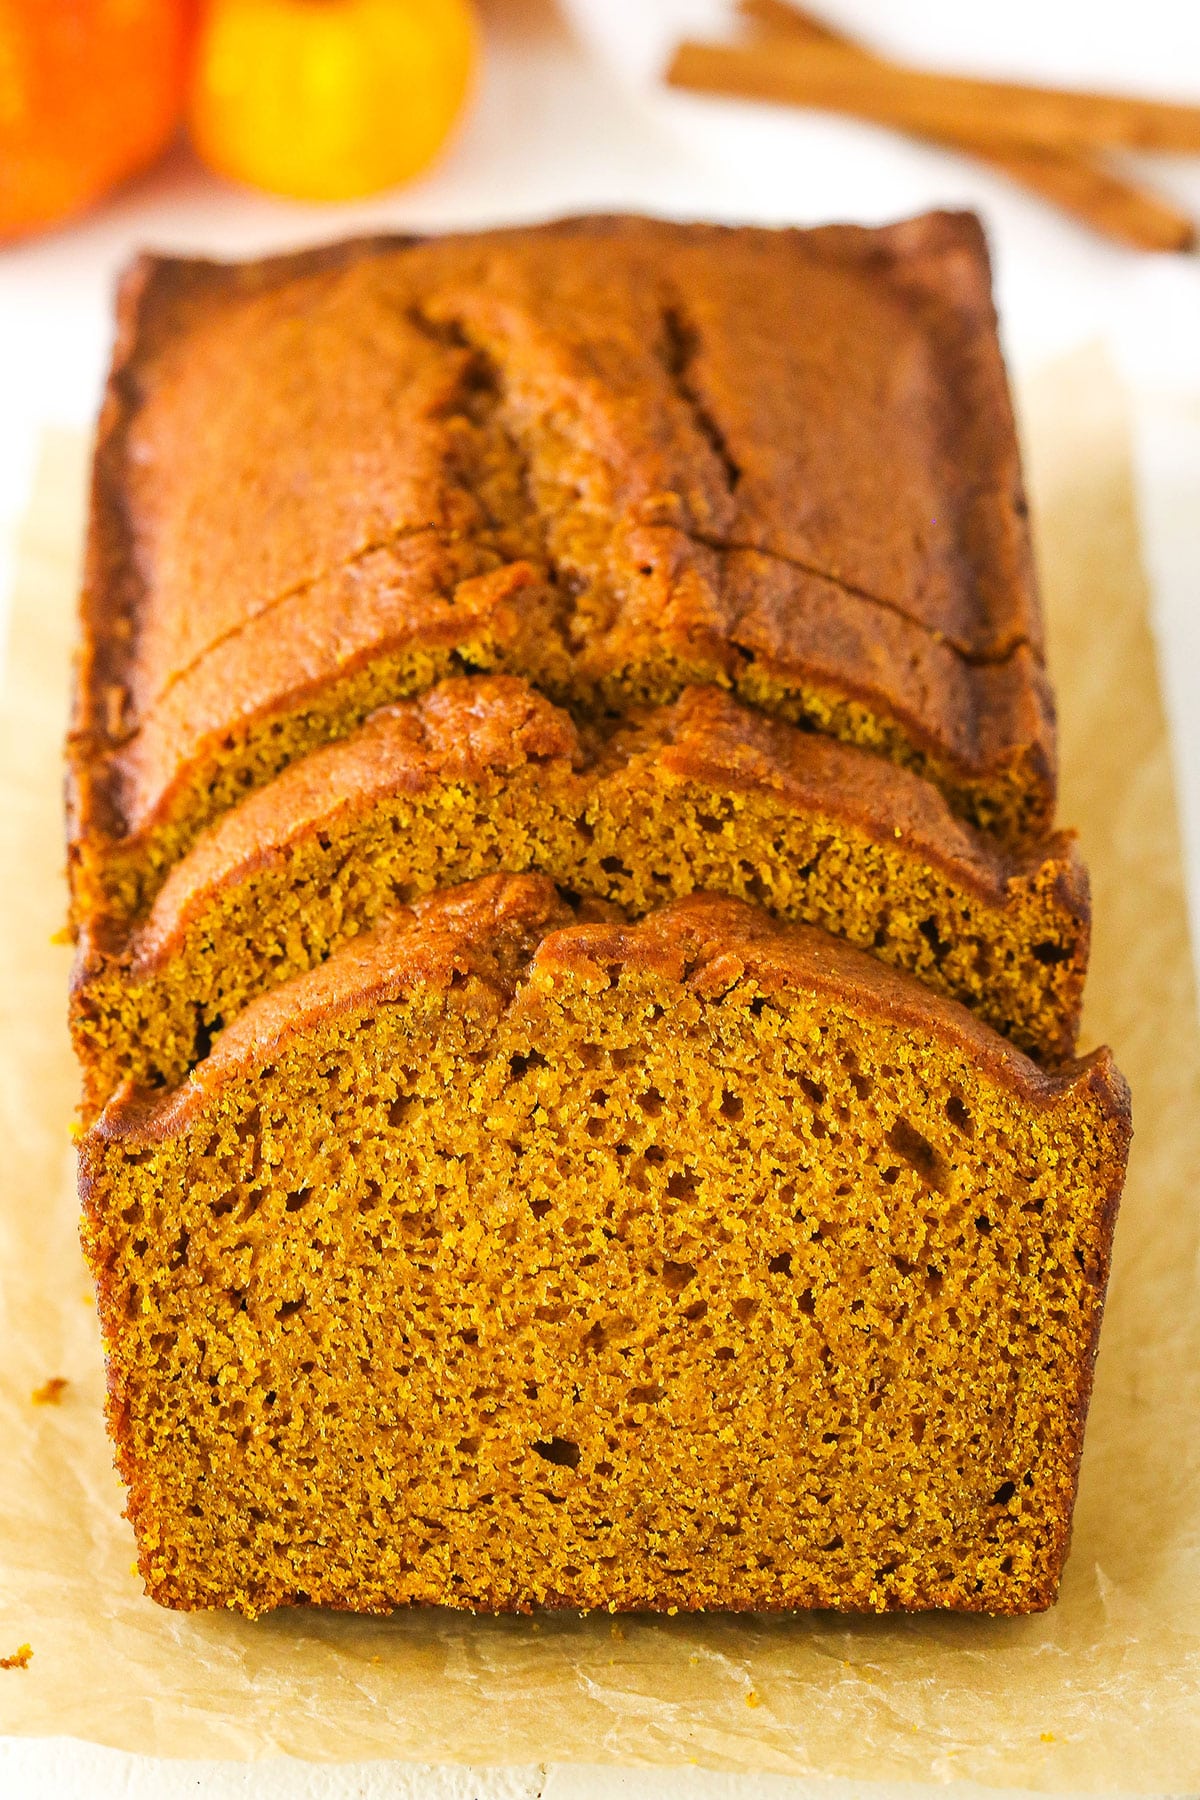 Side view of three slices of Pumpkin Bread leaning against the remainder of the Pumpkin Bread loaf